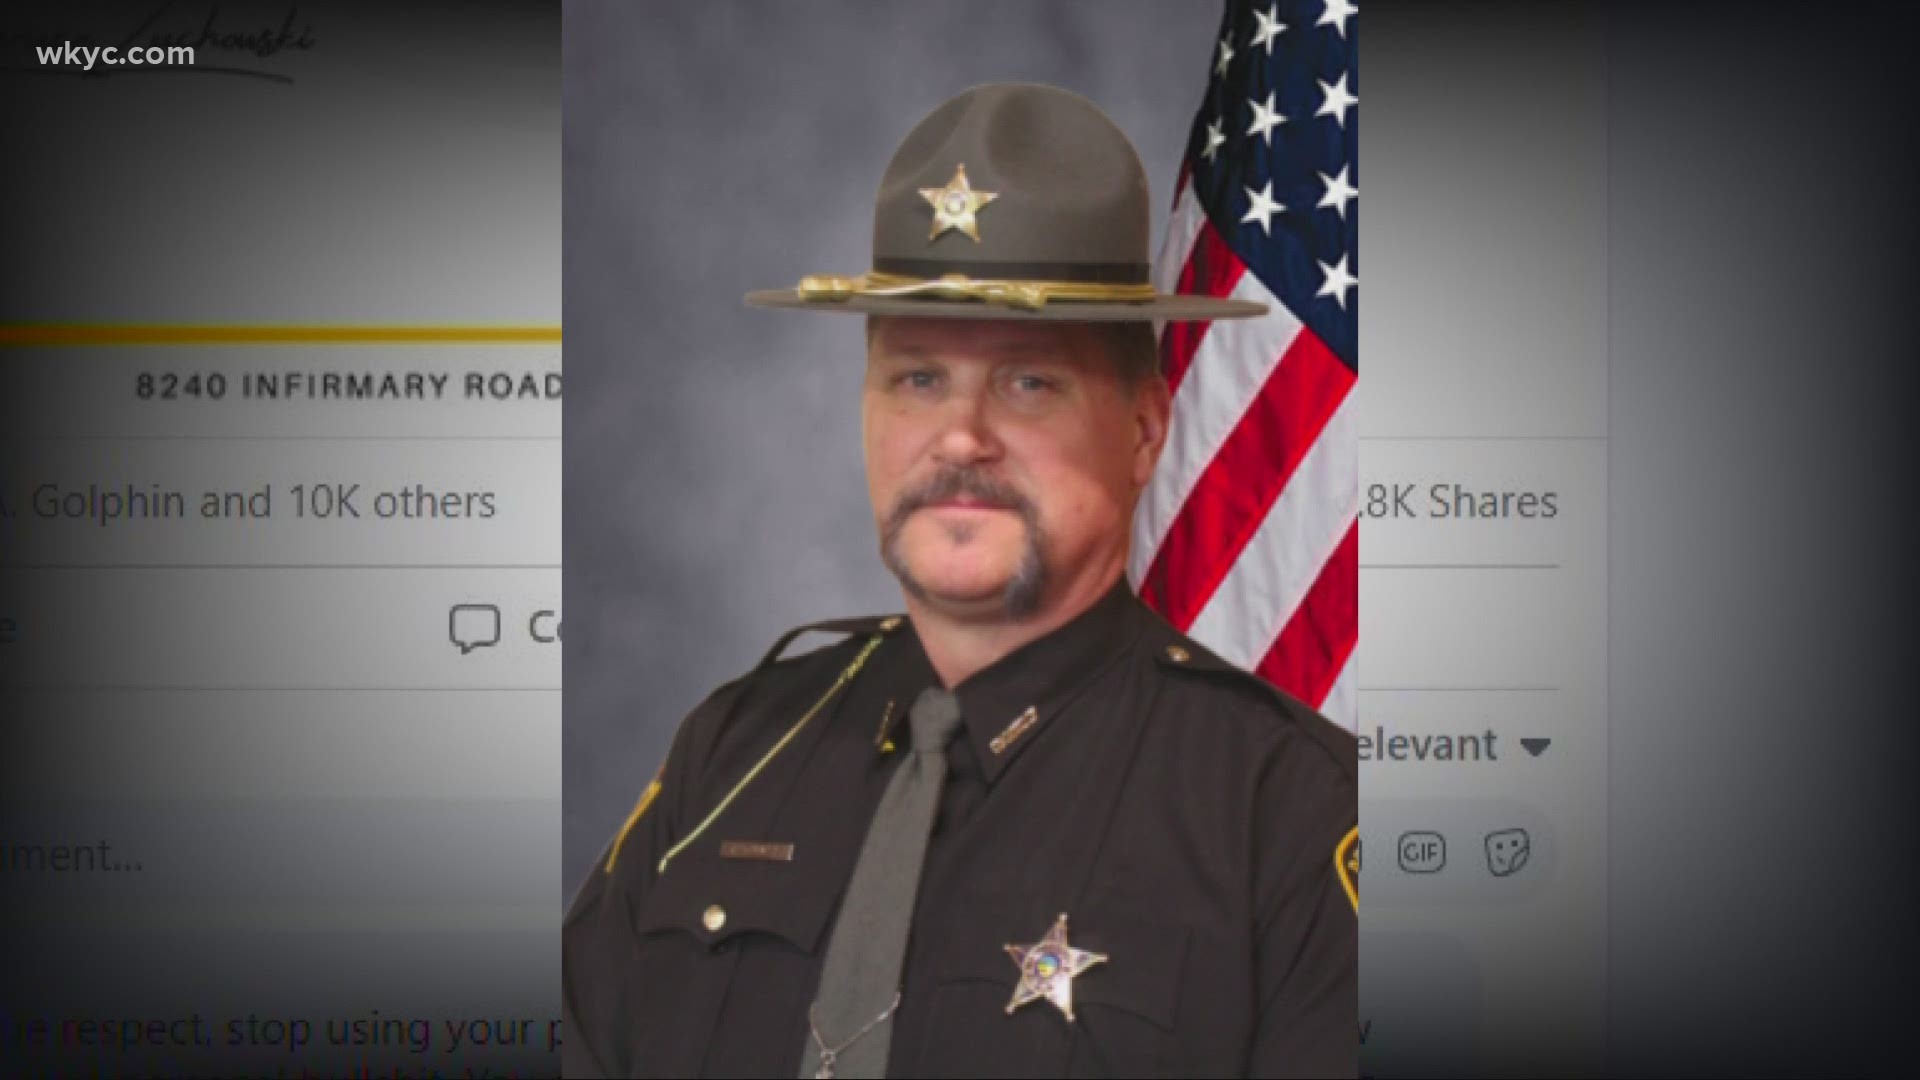 The new Cleveland Guardians name has gotten nationwide attention… and now a local sheriff has too, after posting his opinion on the department's Facebook page.